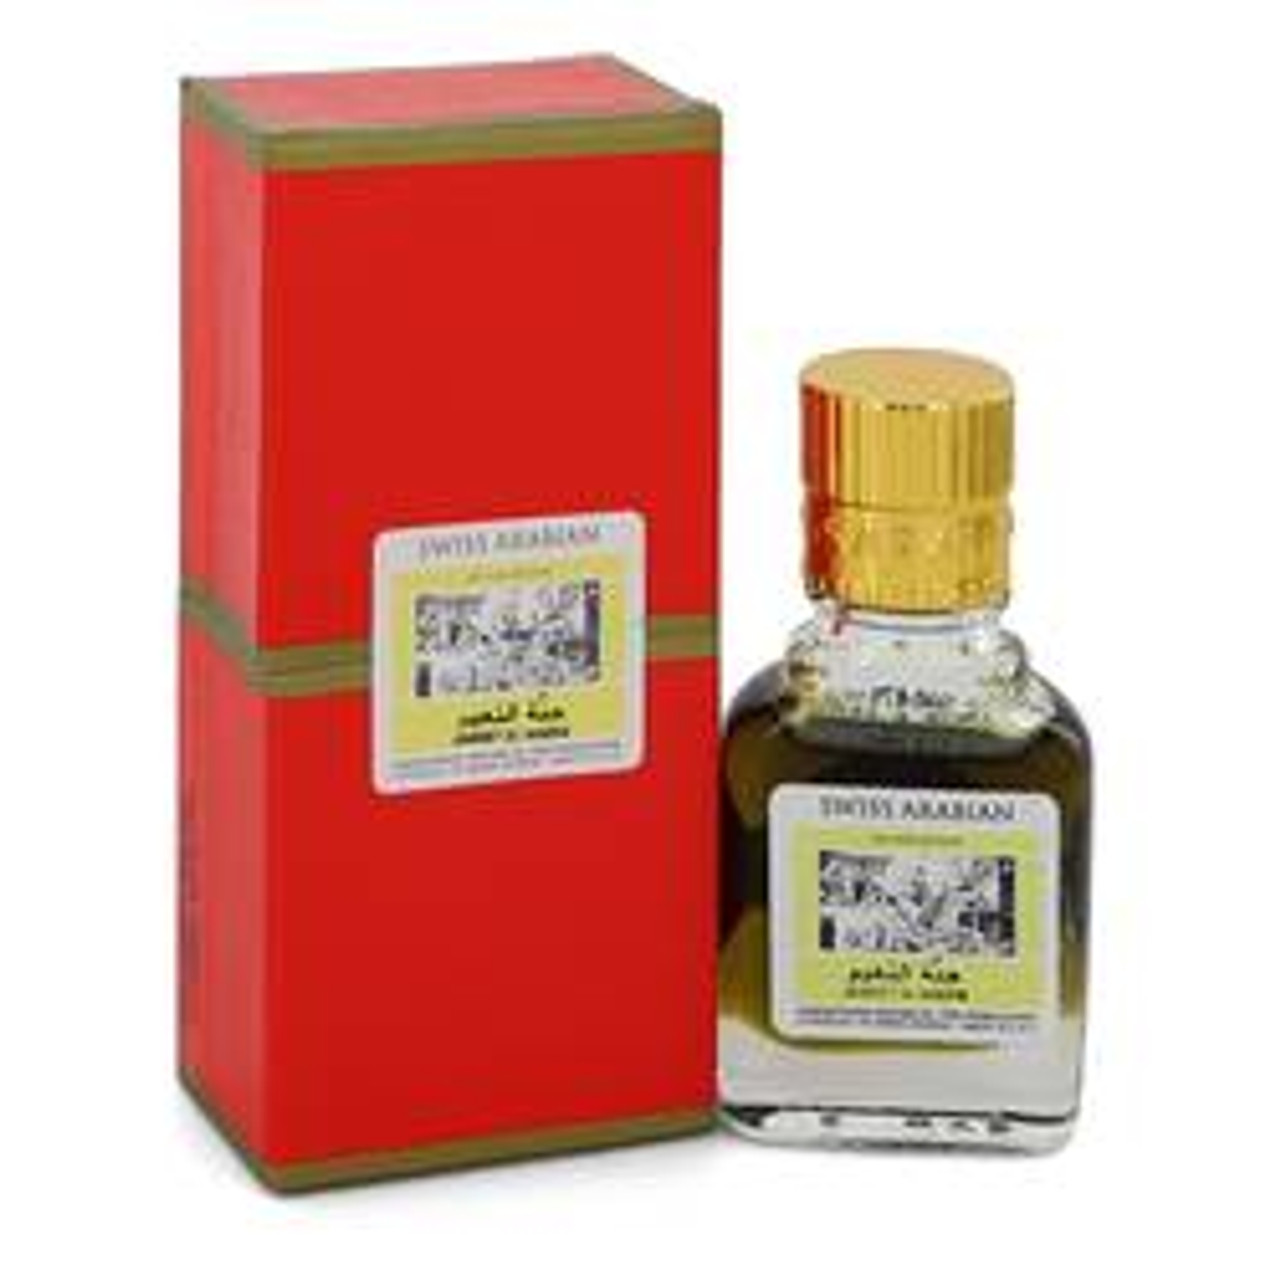 Jannet El Naeem Perfume By Swiss Arabian Concentrated Perfume Oil Free From Alcohol (Unisex) 0.3 oz for Women - [From 67.00 - Choose pk Qty ] - *Ships from Miami